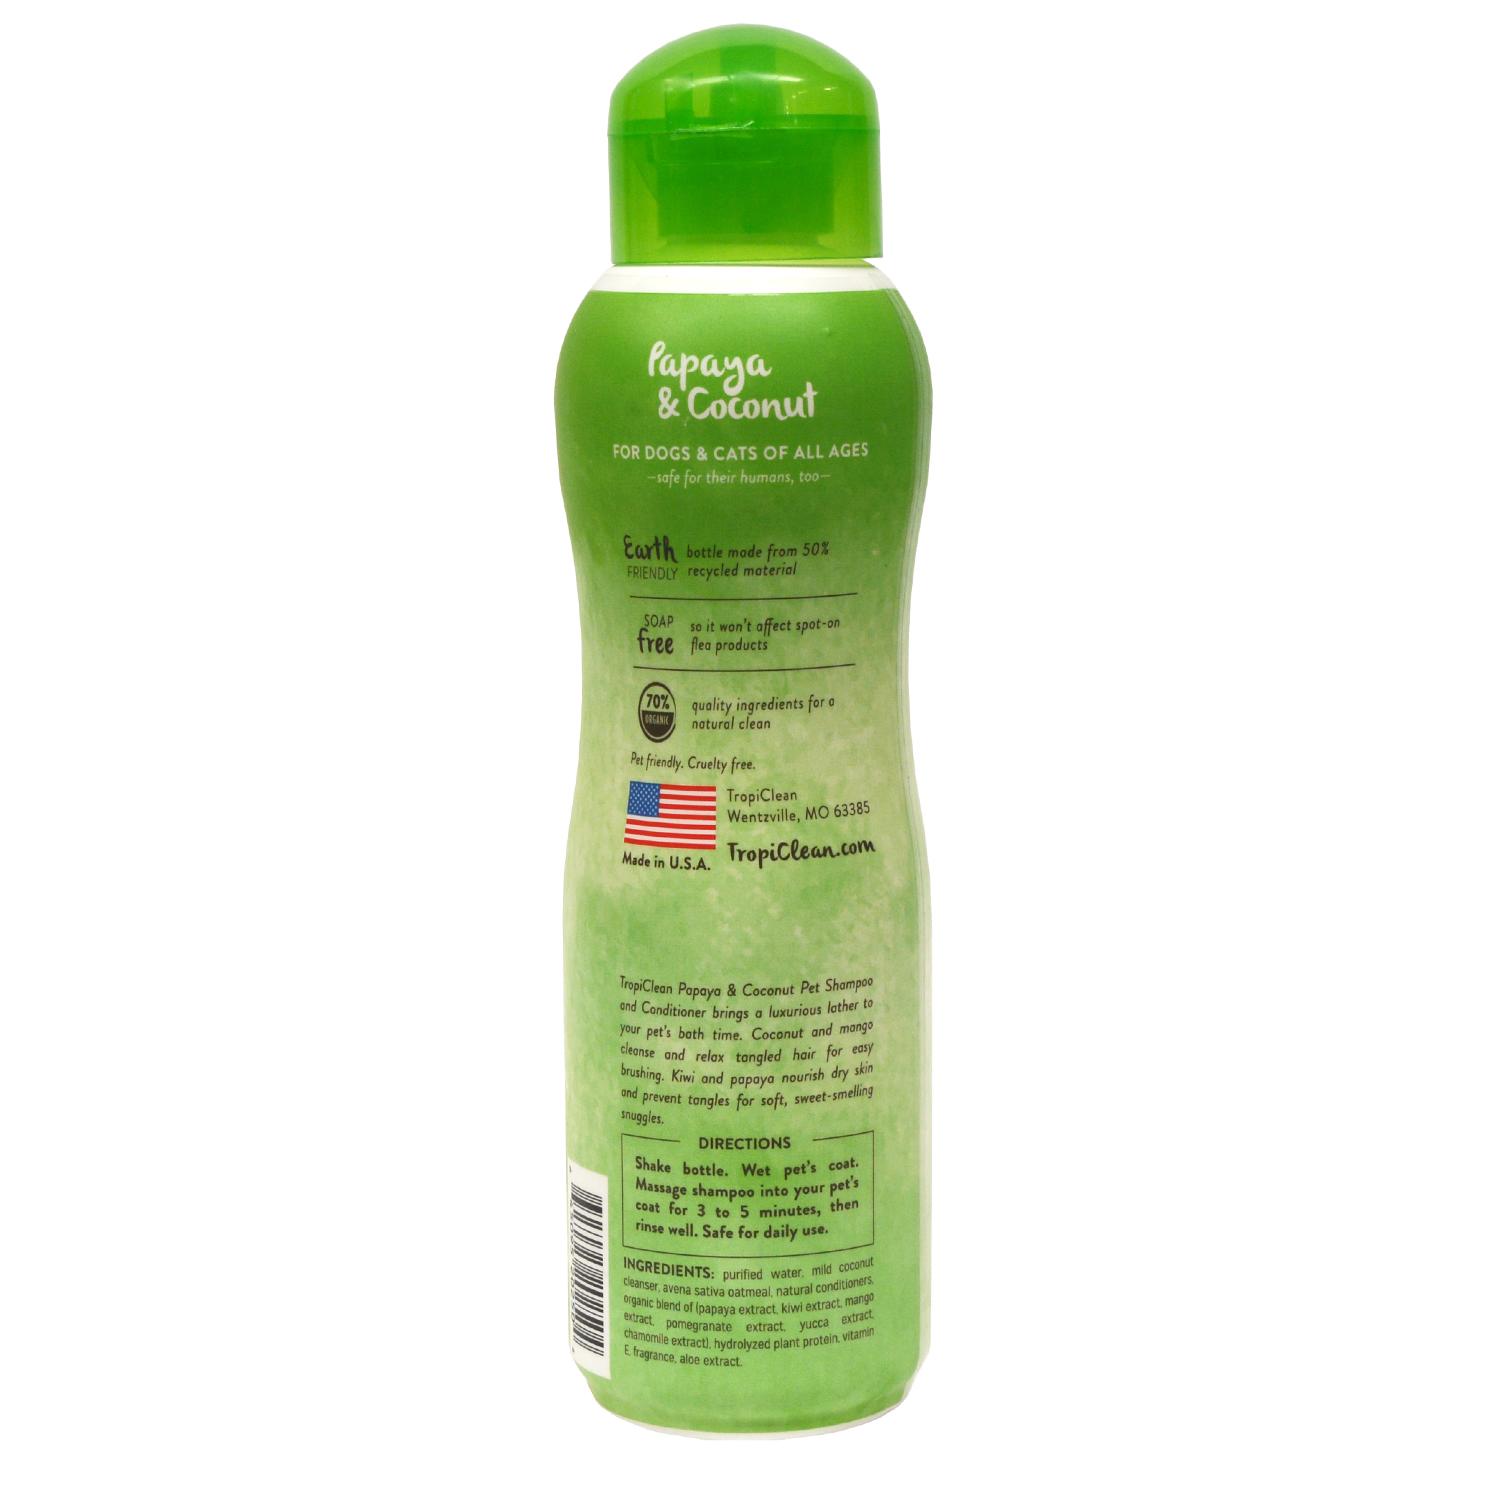 Back of a bottle of Tropiclean Luxury 2 in 1 papaya and coconut Pet Shampoo and Conditioner